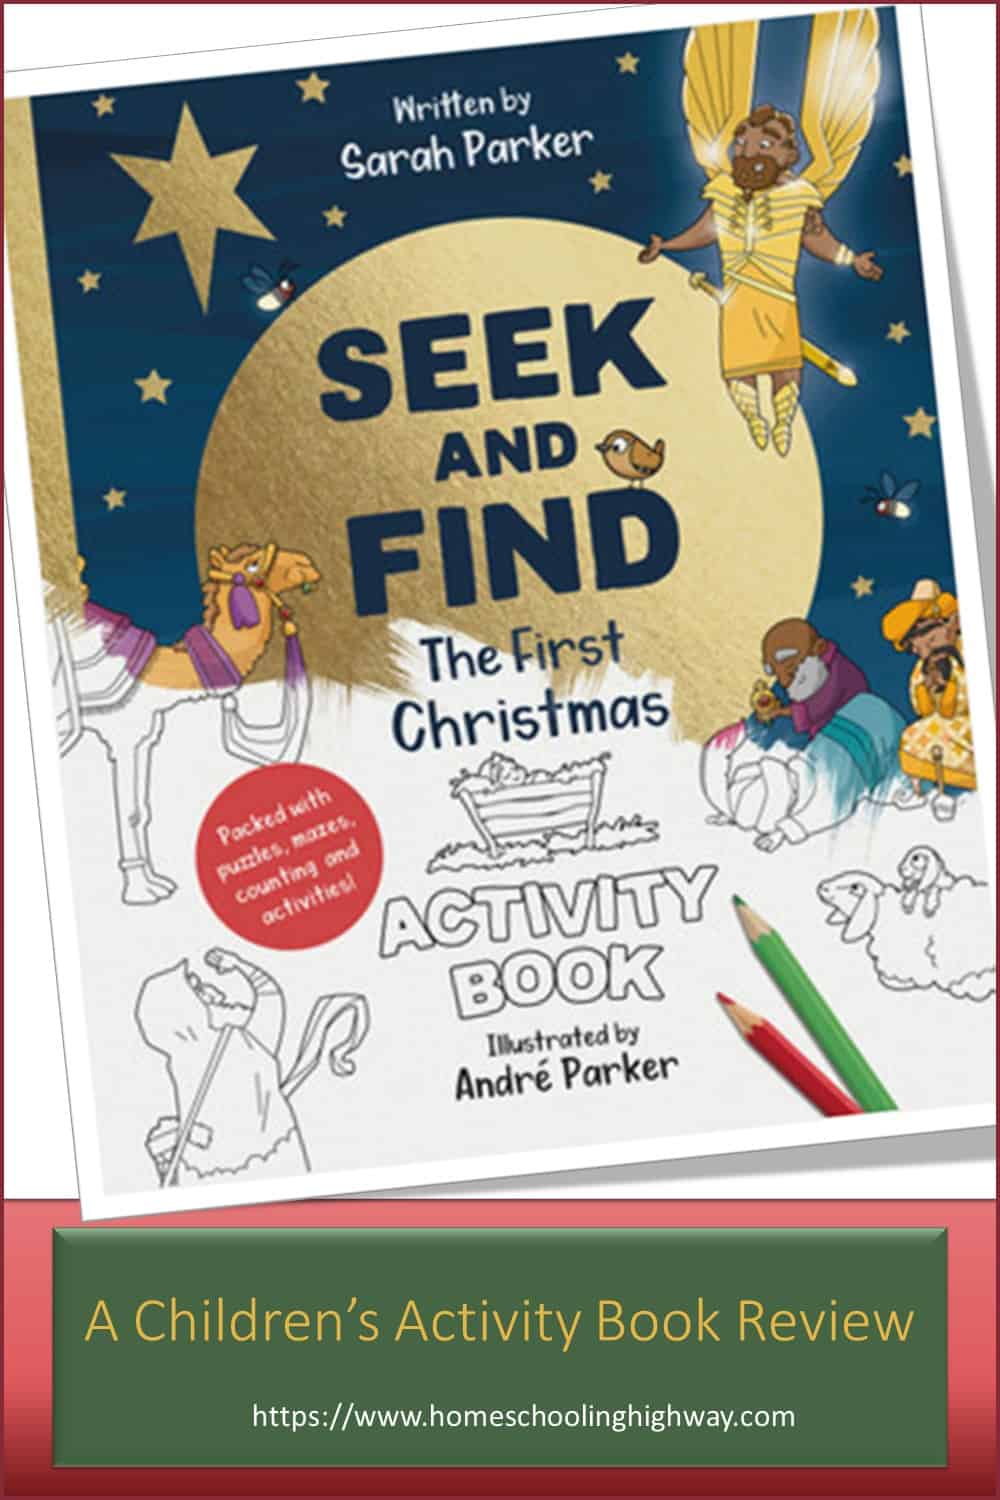 Seek and Find: The First Christmas Activity Book by Sarah Parker. Book reviewed by Homeschooling Highway